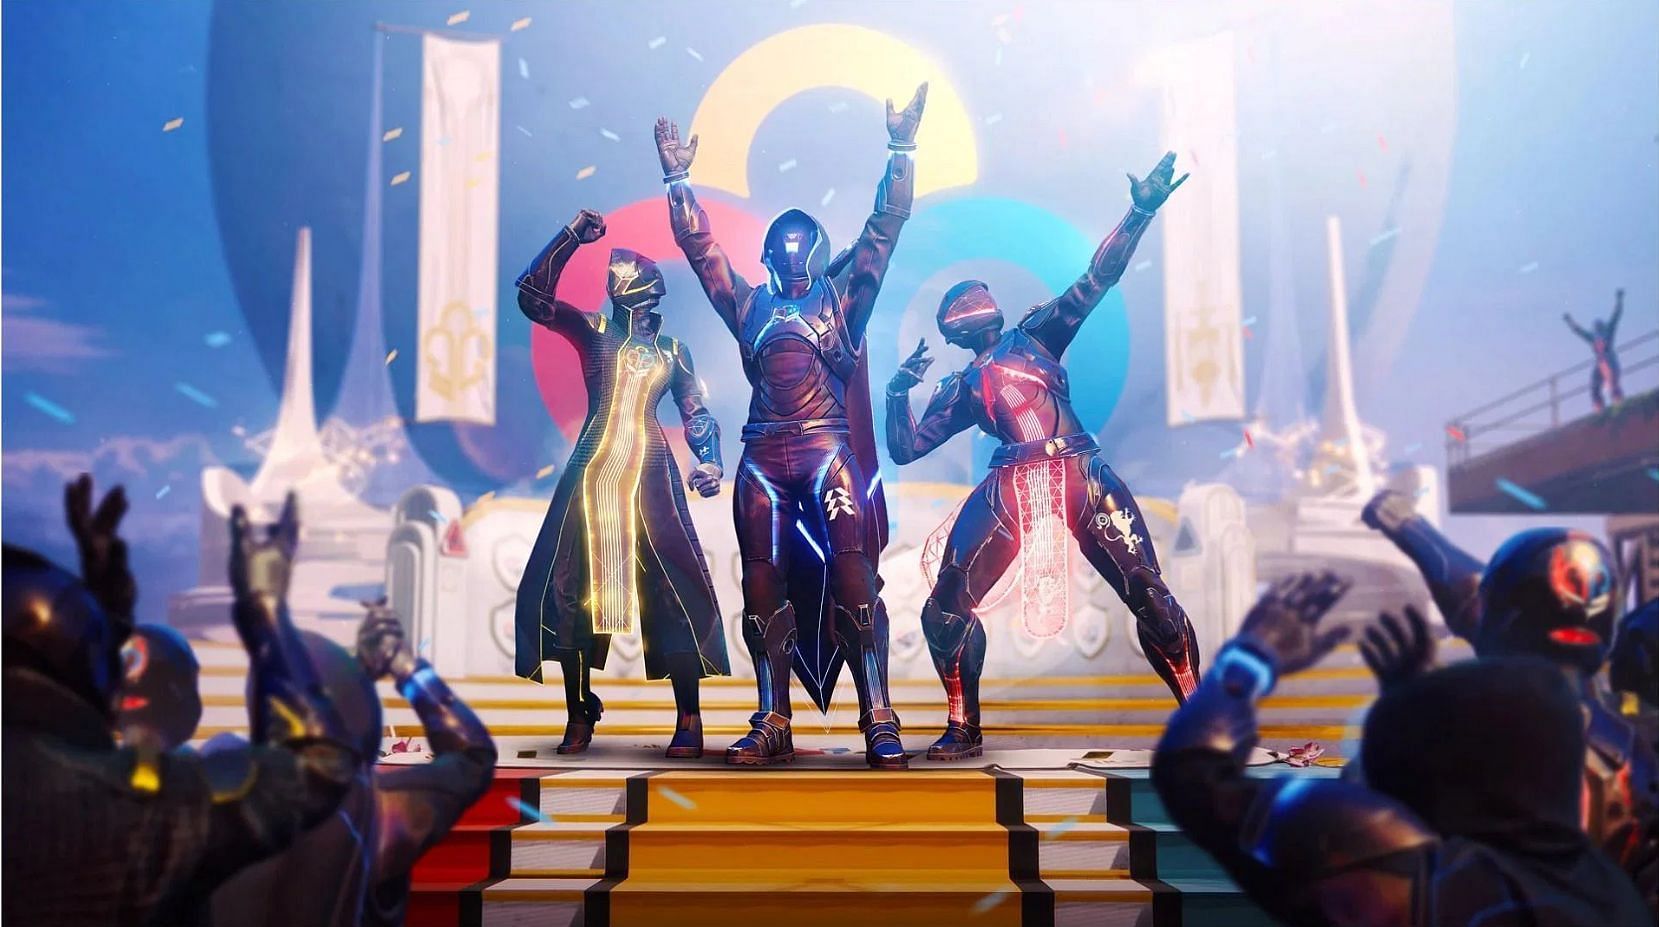 Guardian Games 2022 official cover (Image via Bungie)